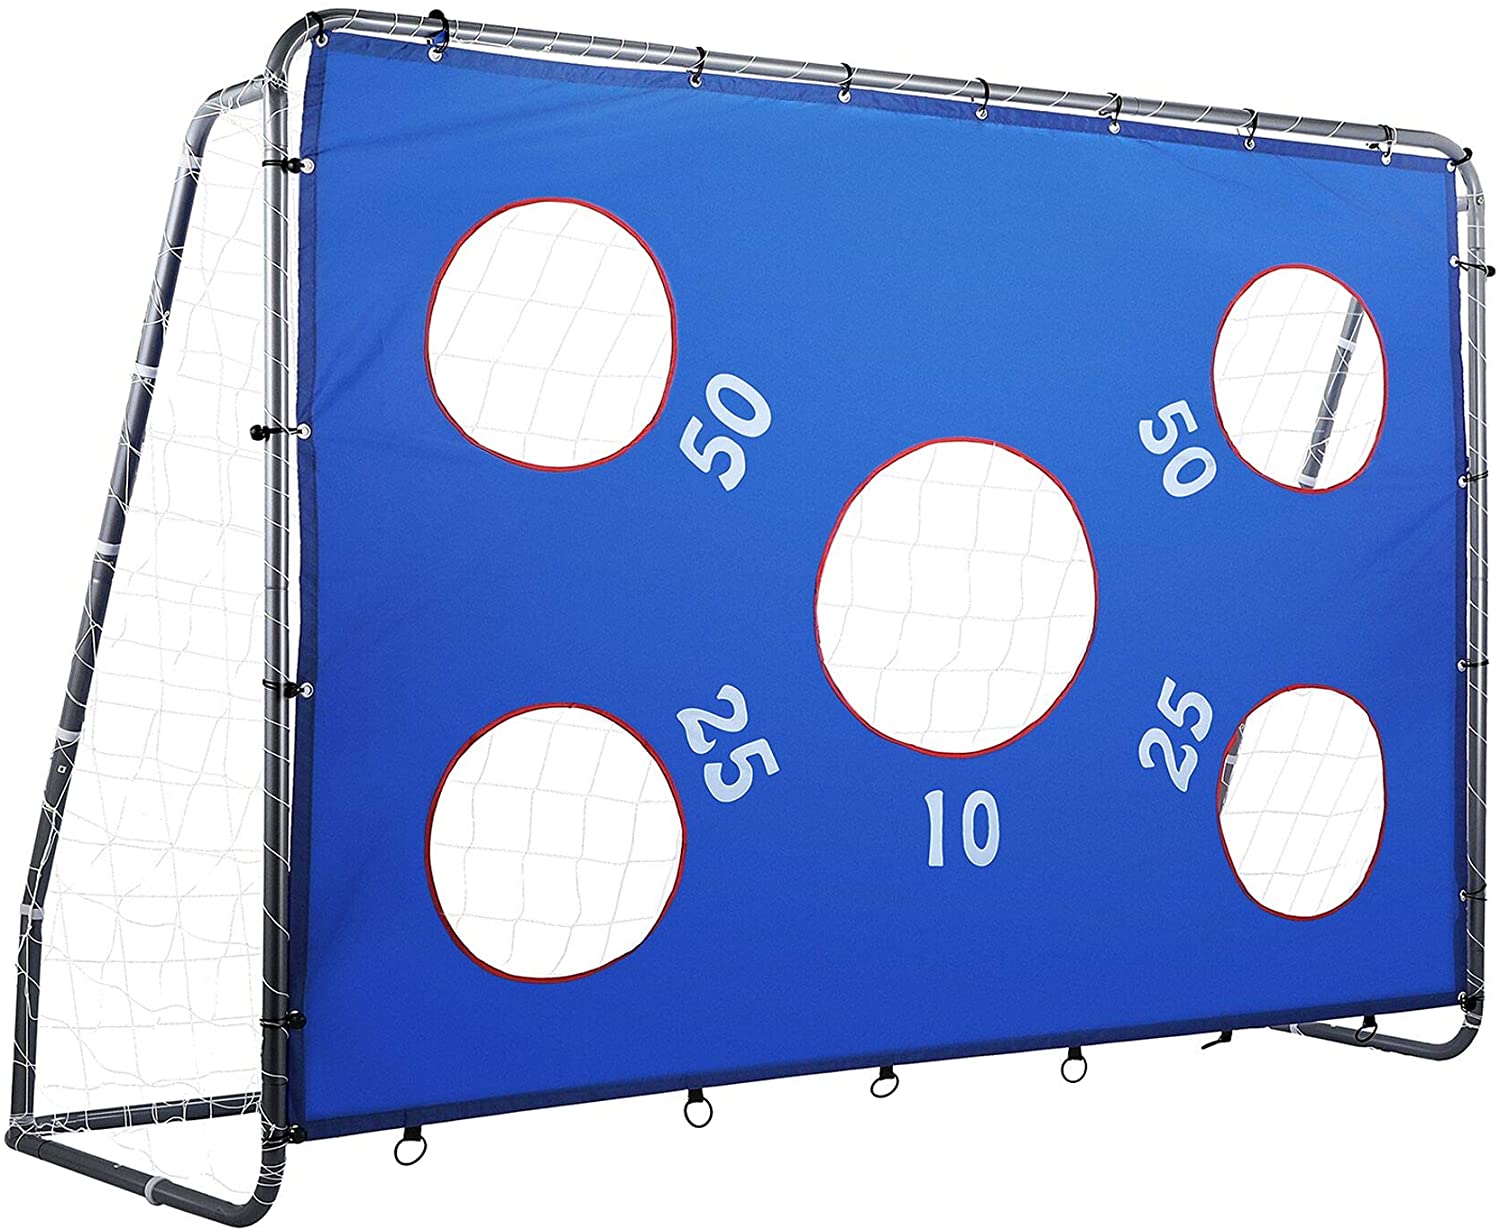 ZELUS Multifunction Soccer Goal With Targets, 8×6-Foot